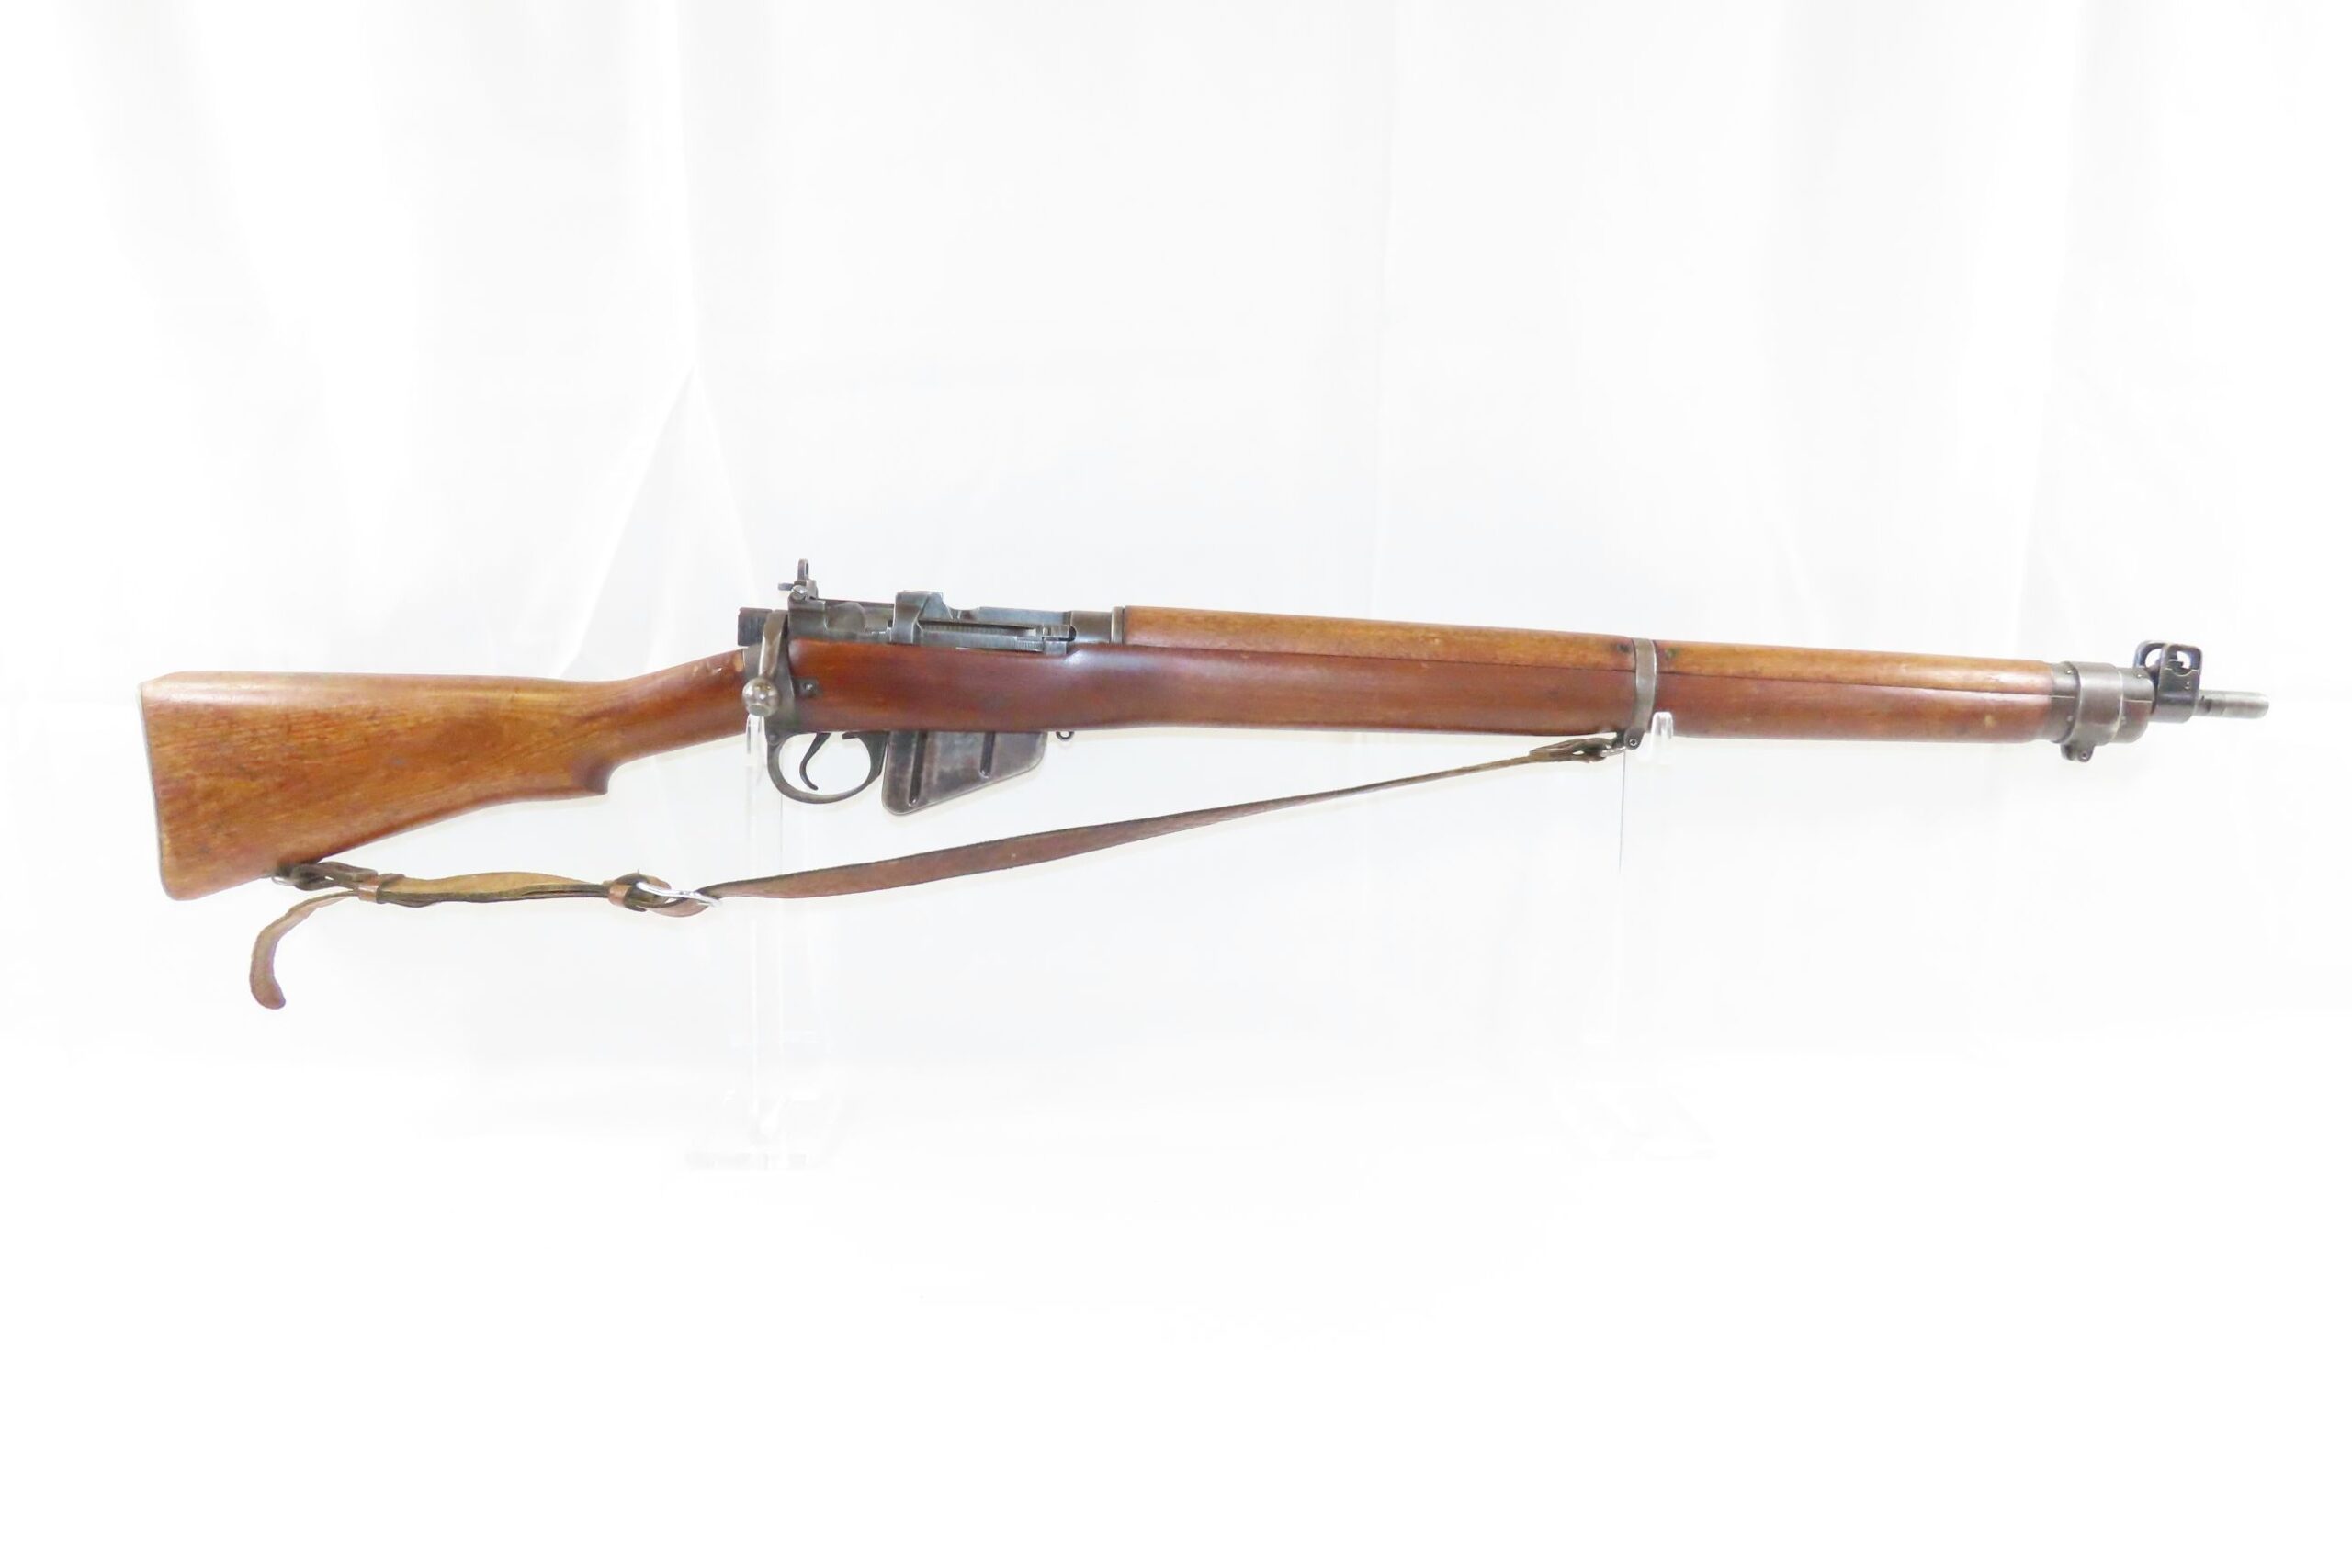 WORLD WAR 2 US SAVAGE Enfield No. 4 Mk. 1* C&R Bolt Action LEND/LEASE Rifle  LEND/LEASE ACT Produced in the United States